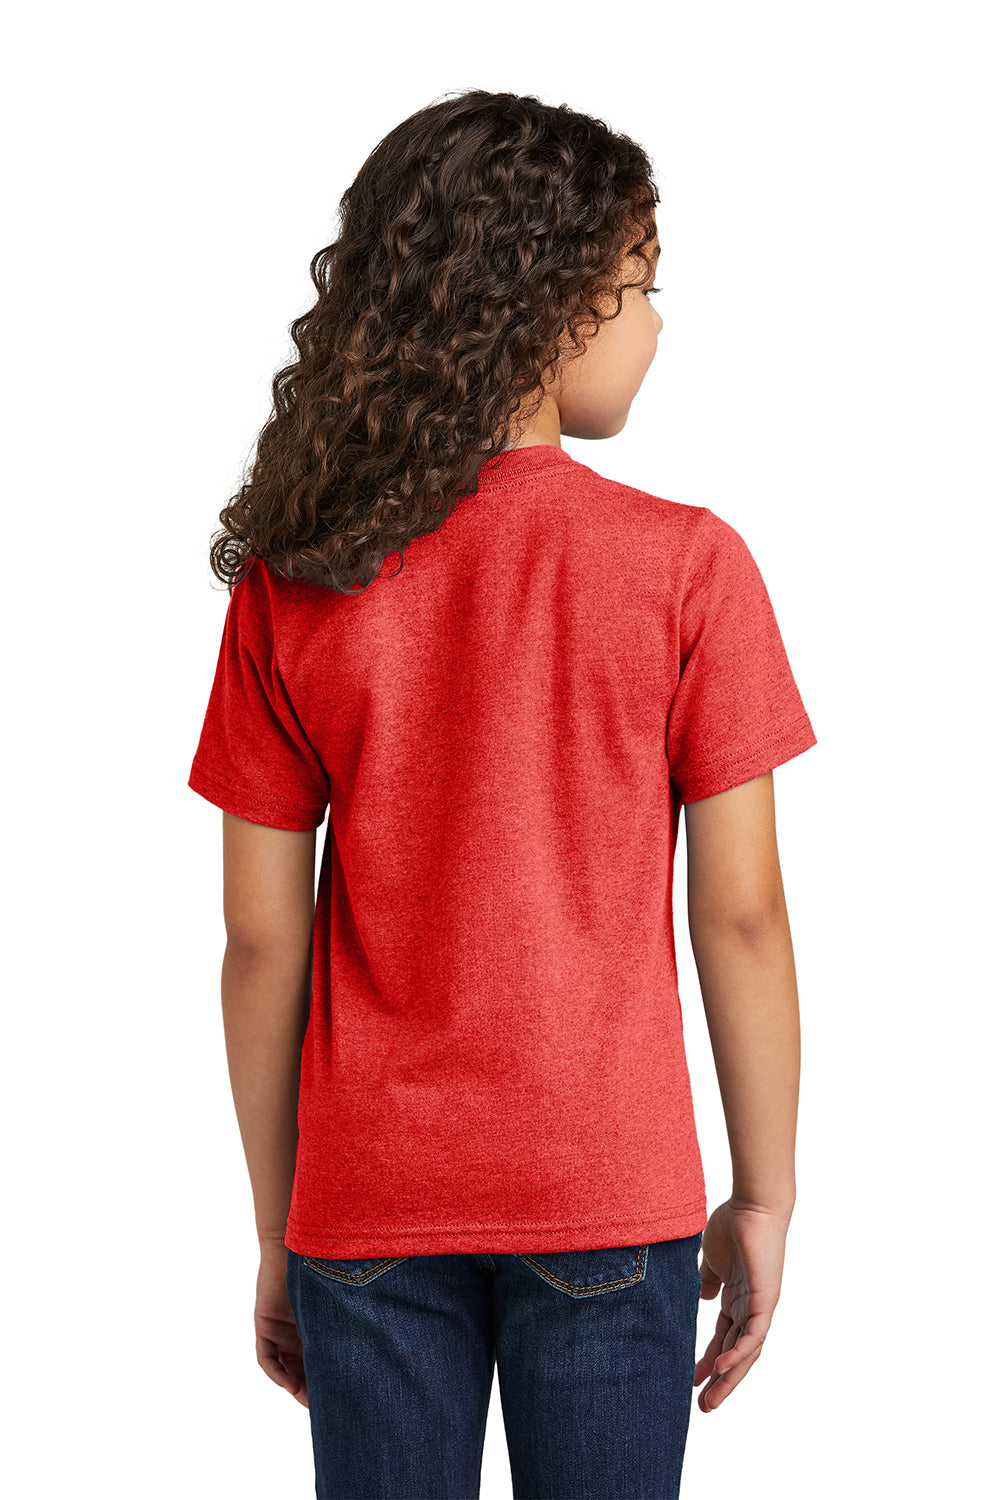 Port & Company PC330Y Youth Short Sleeve Crewneck T-Shirt Bright Heather Red Back